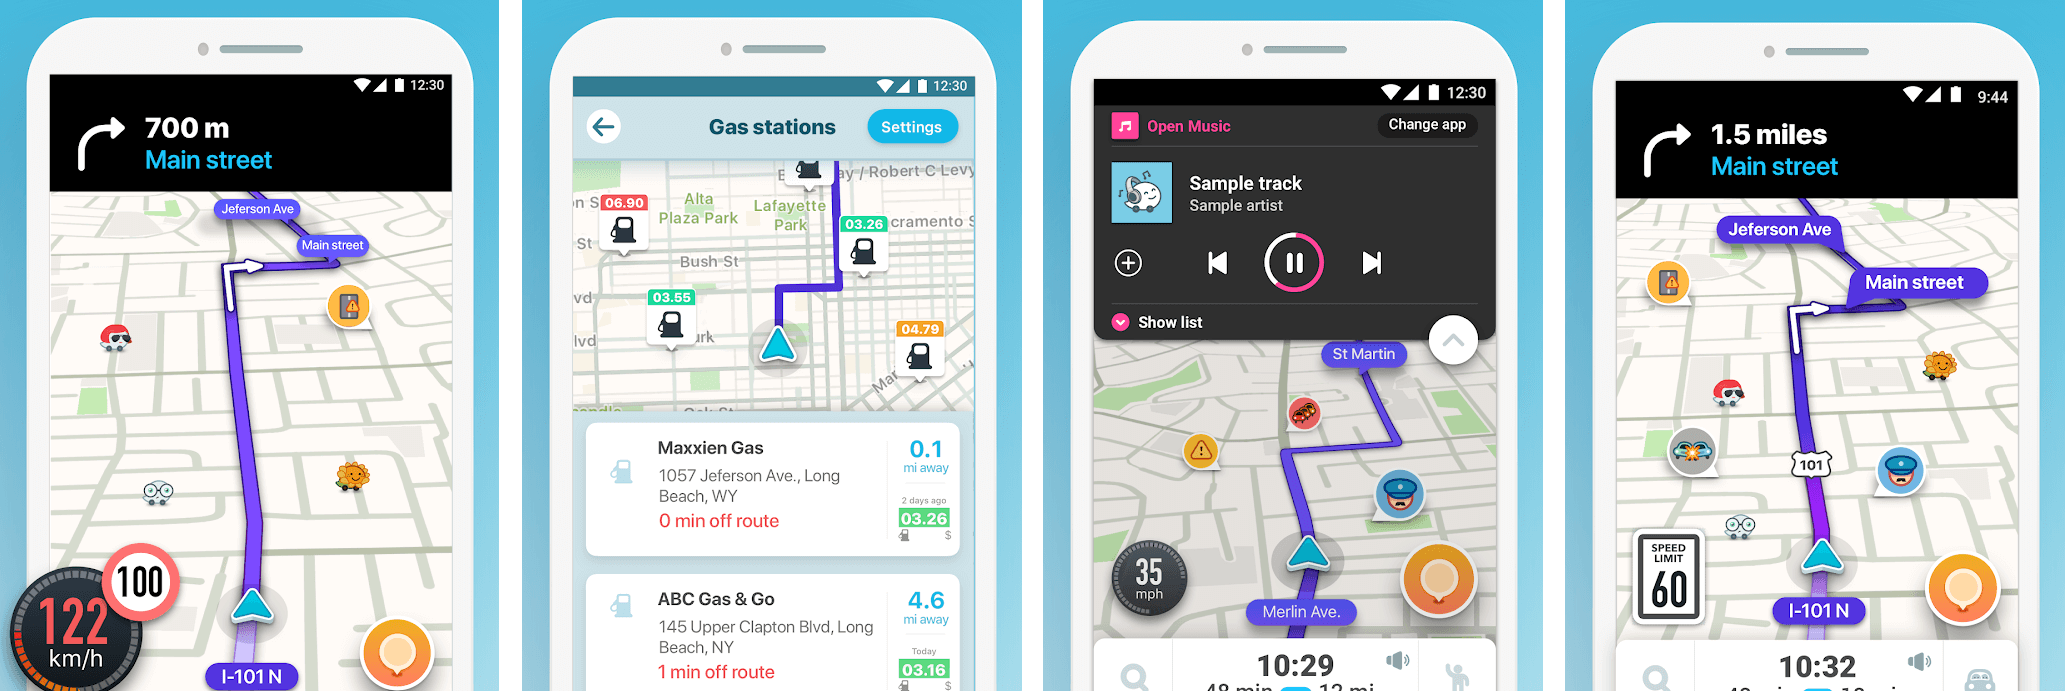 Waze location tracking app for Android